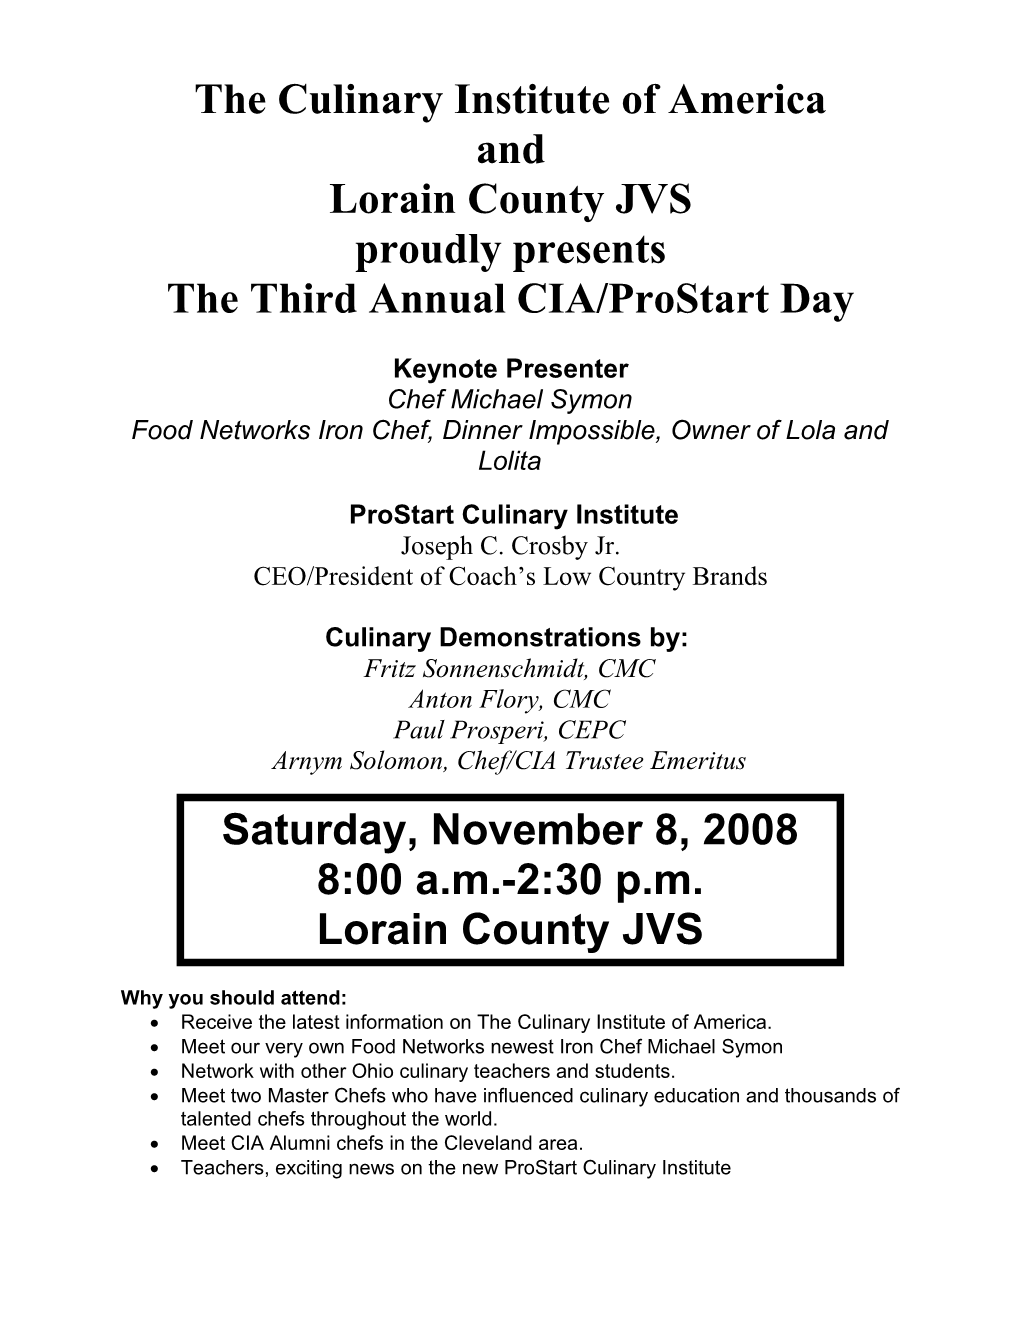 The Culinary Institute of America and Lorain County JVS